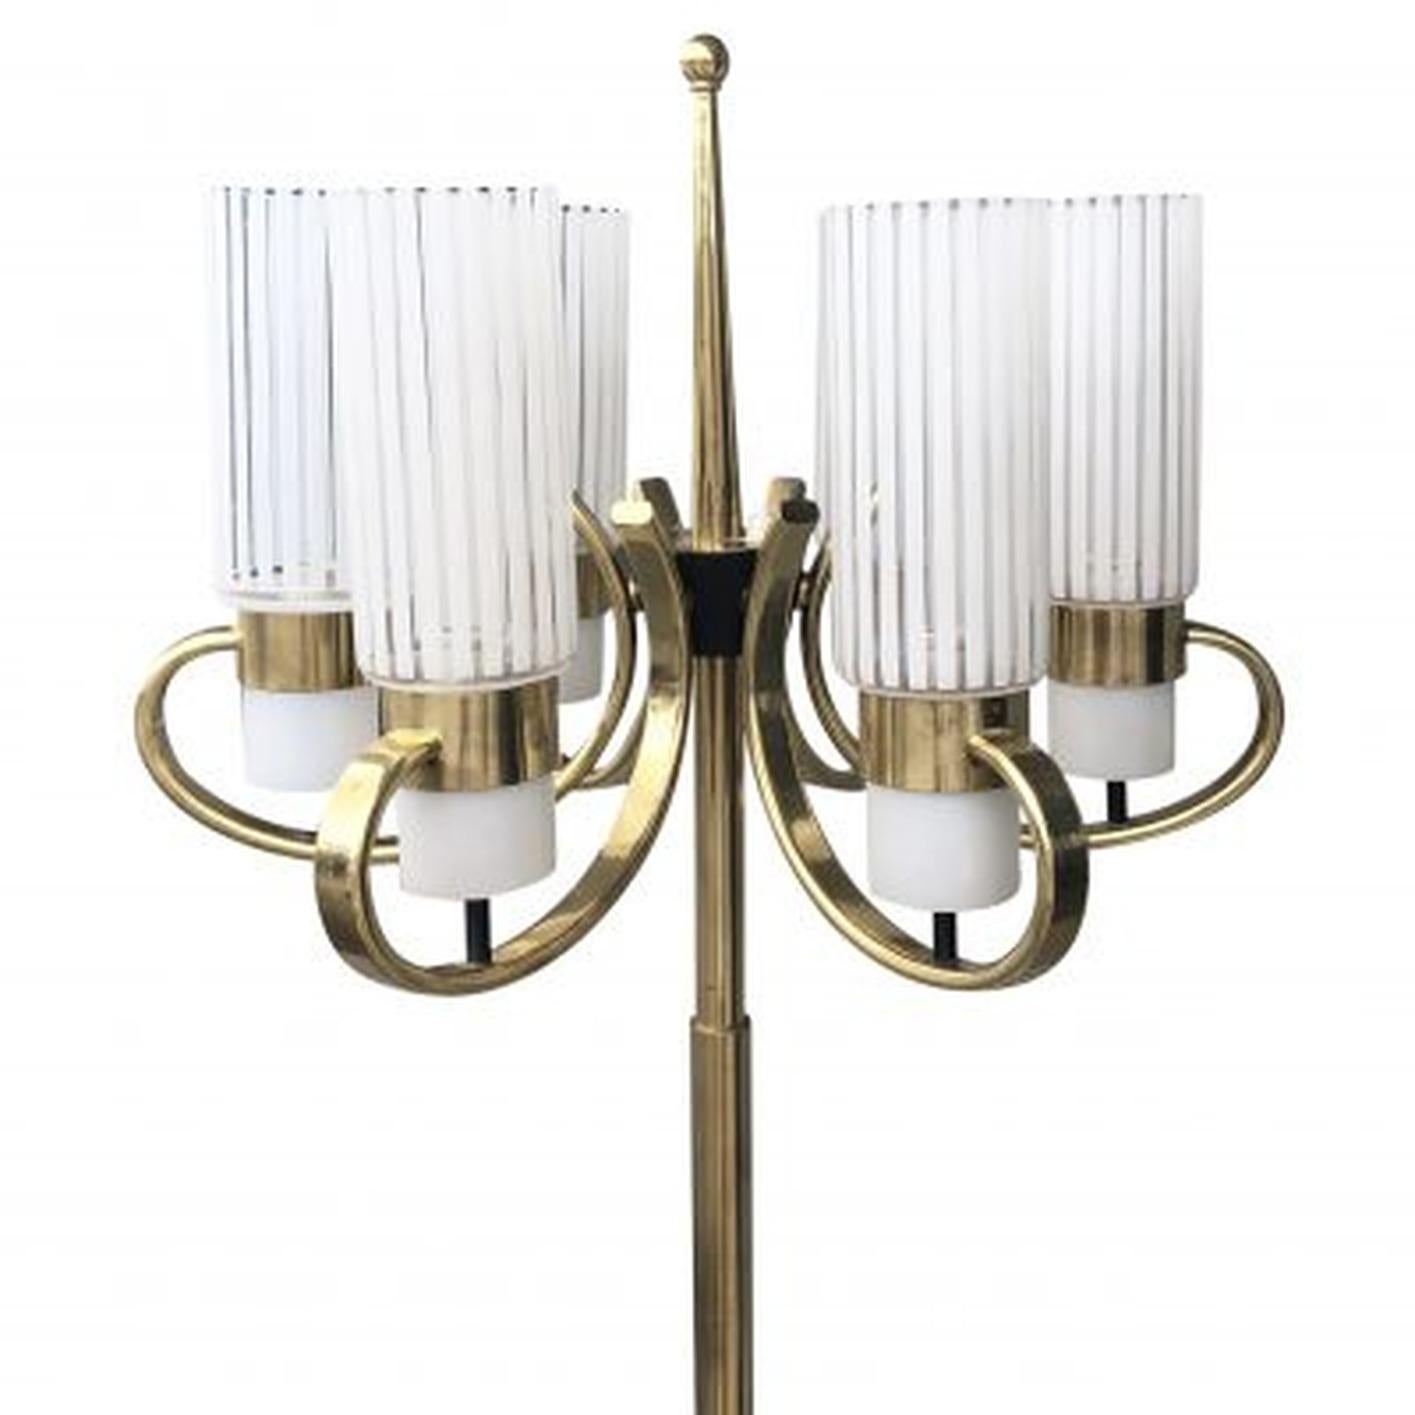 A vintage Mid-Century Modern Italian brass floor lamp with six scroll form arms with cylindrical striped glass shades, standing on a round, white marble base. In the style of Stilnovo, each shade is featuring a one light socket, in good condition.